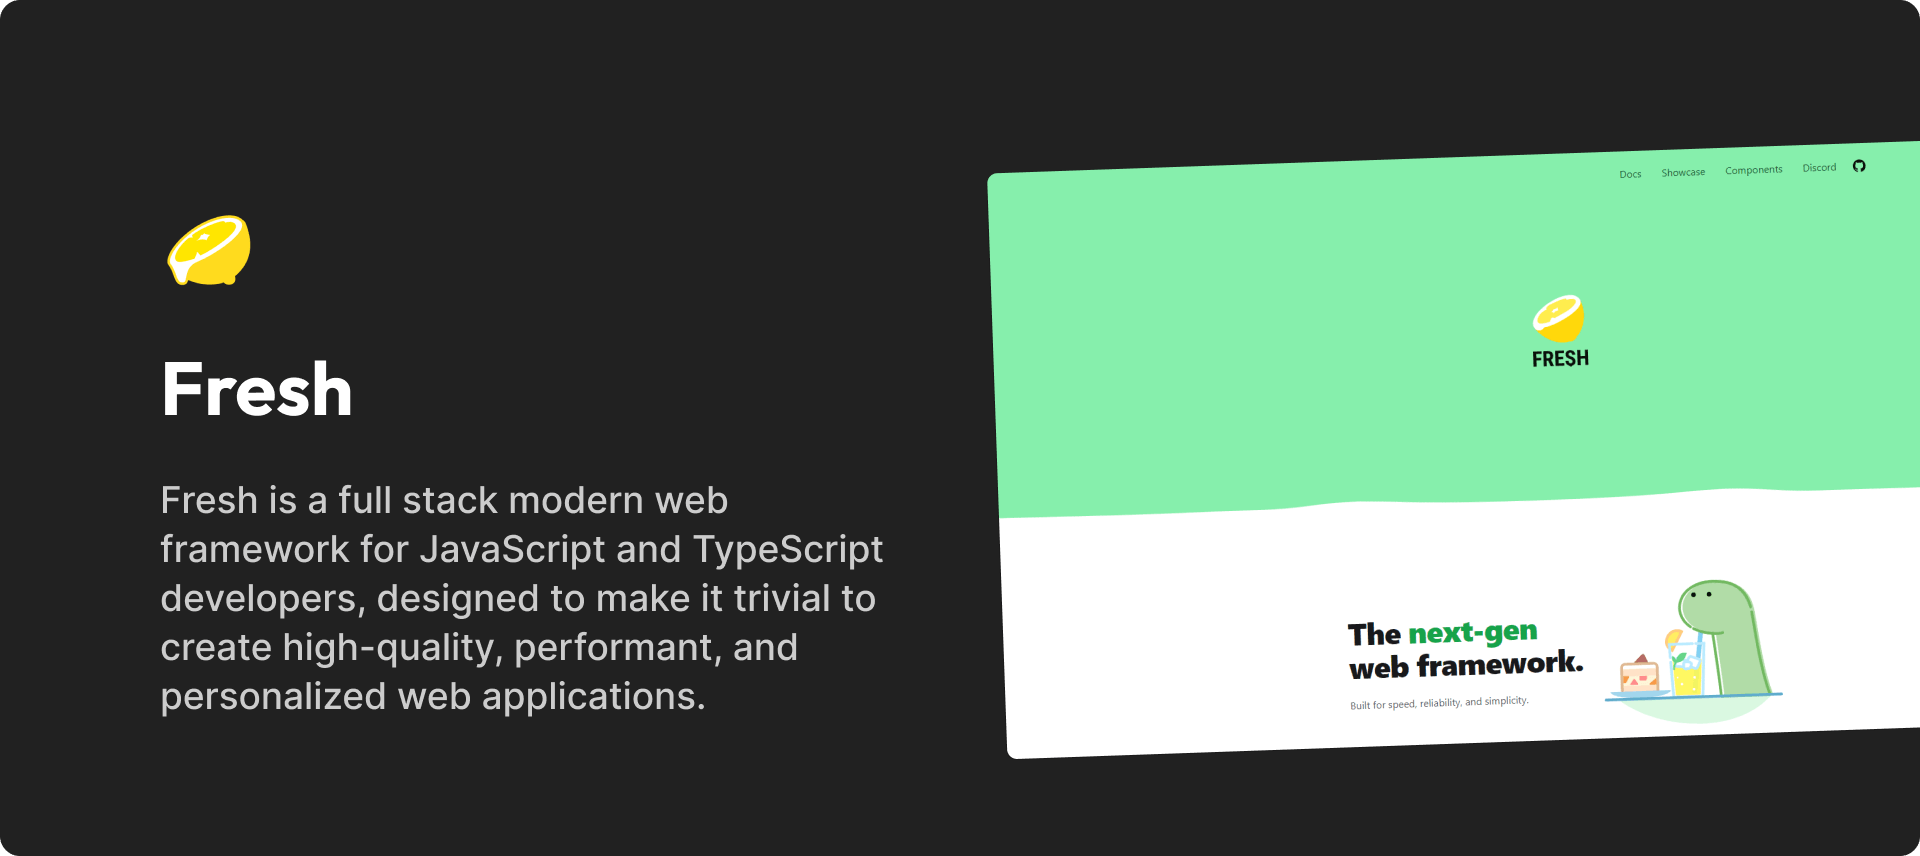 Fresh is a full stack modern web framework for JavaScript and TypeScript developers, designed to make it trivial to create high-quality, performant, and personalized web applications.